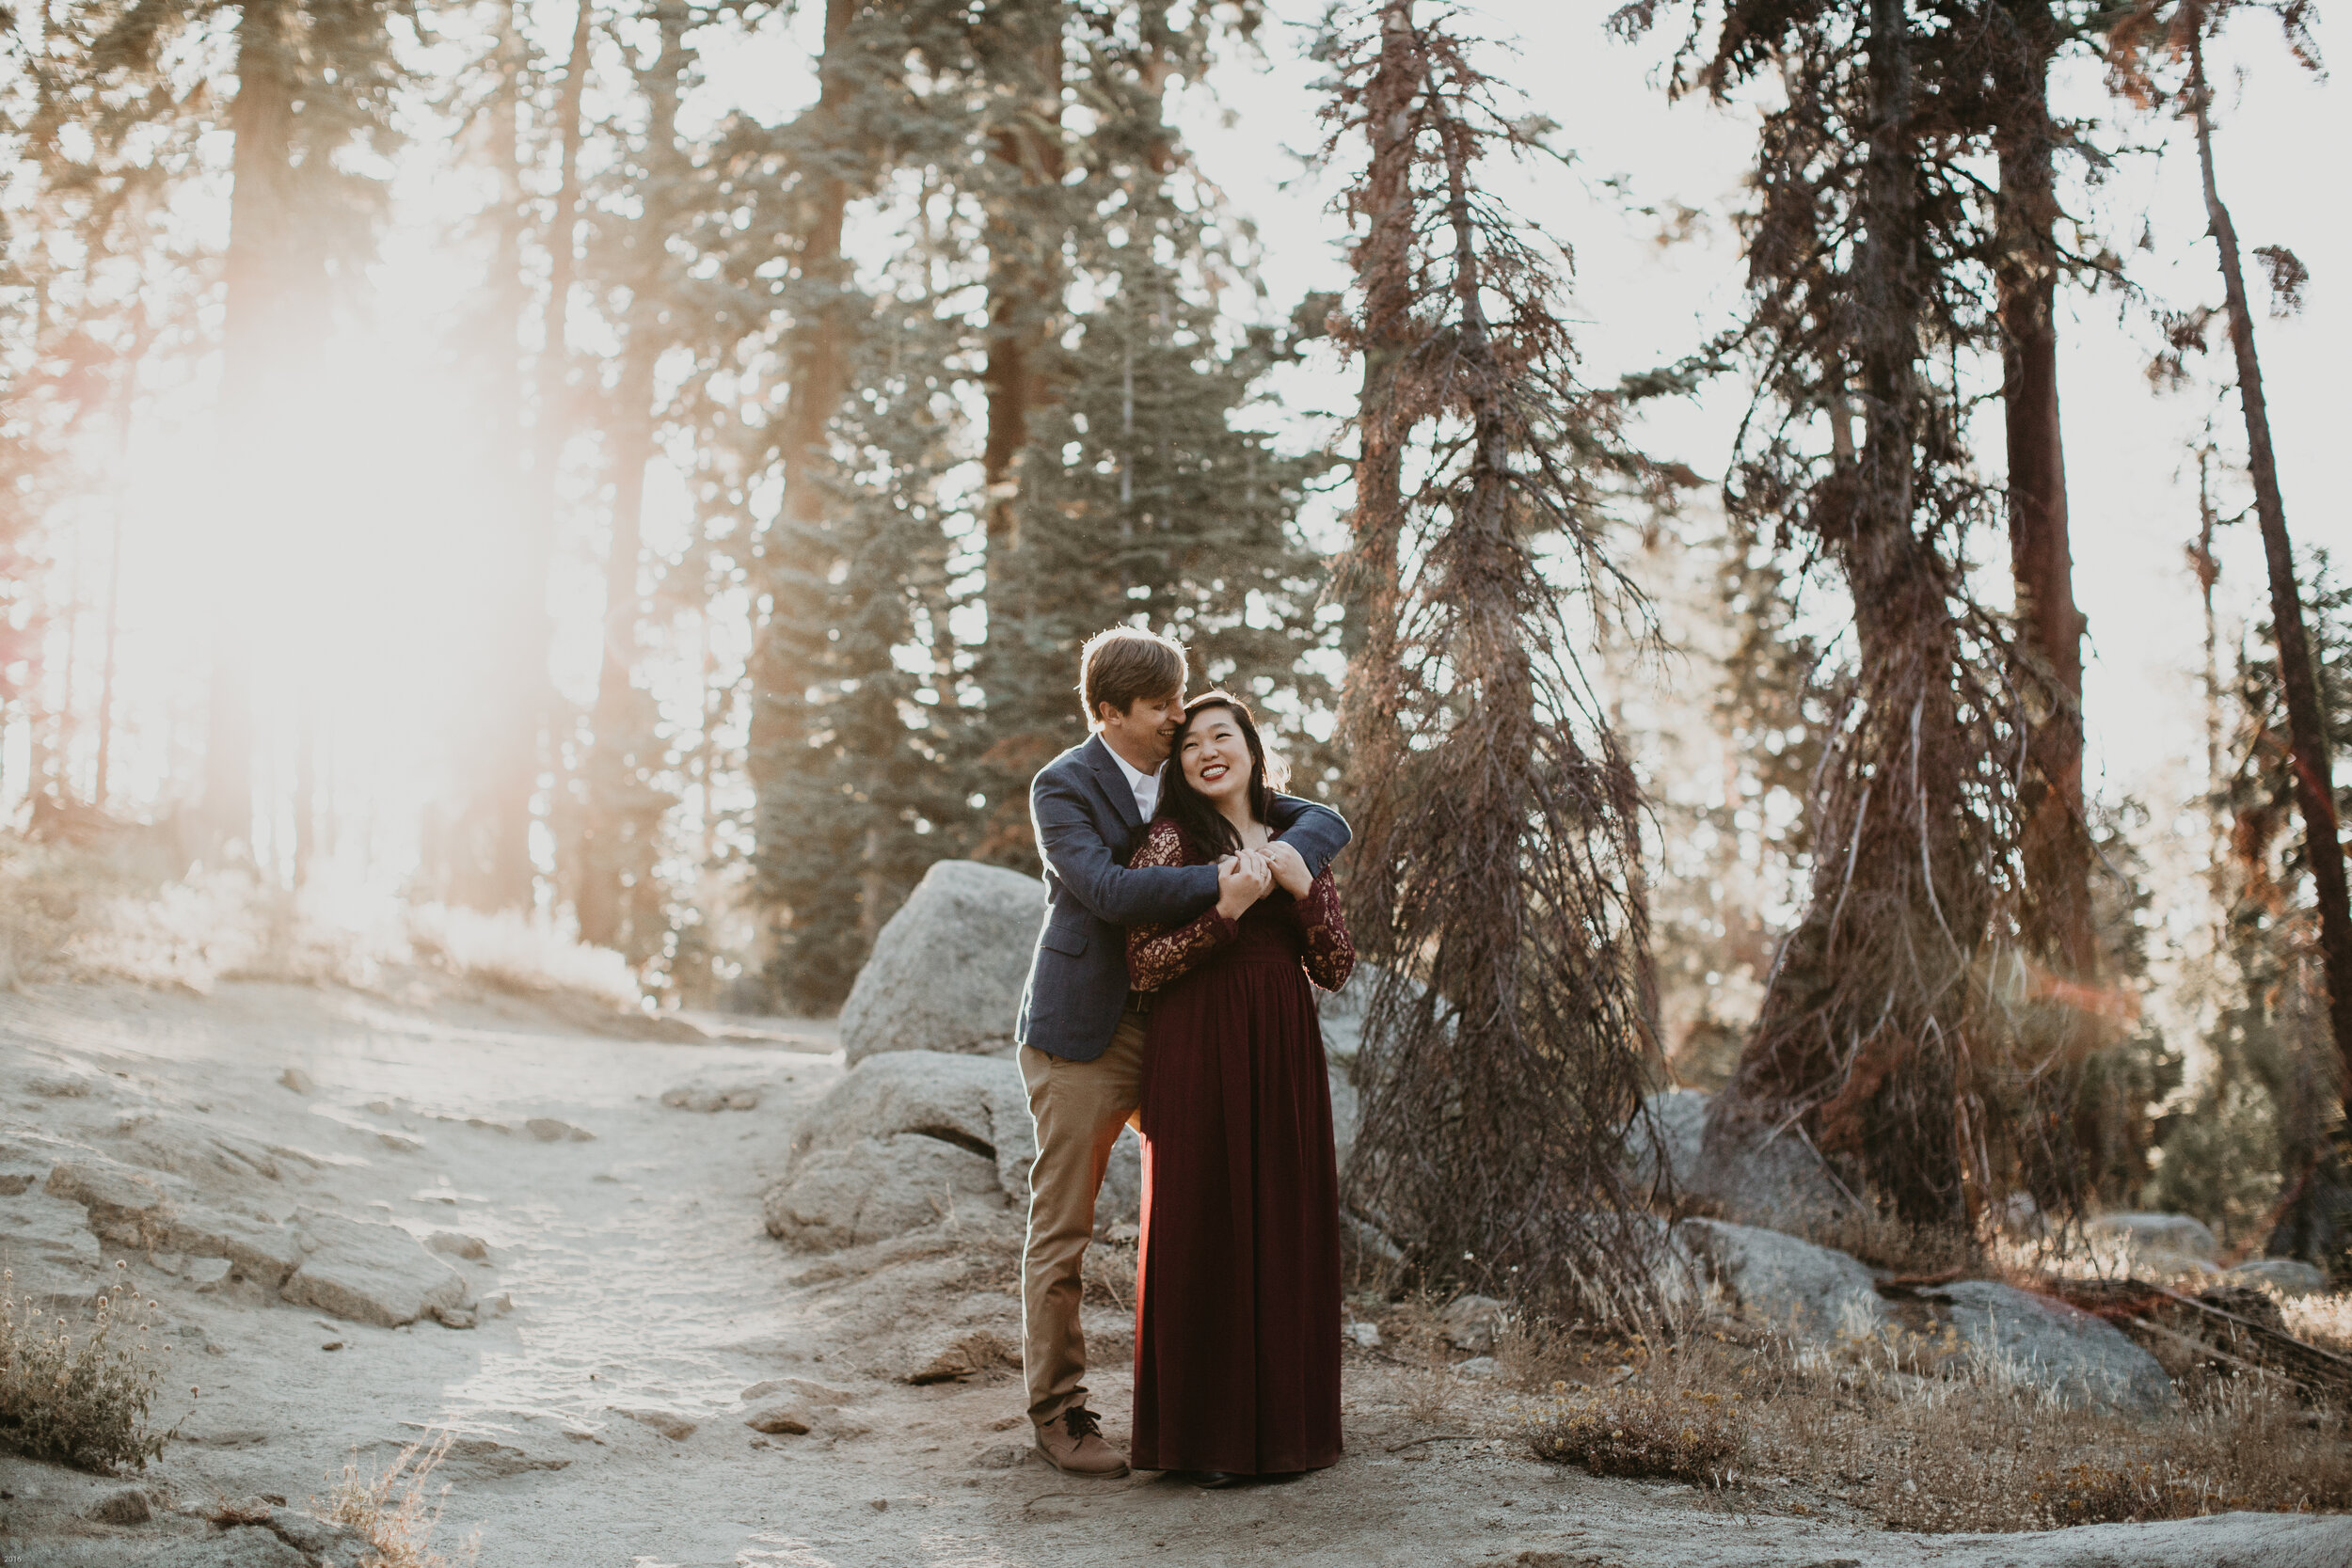 yosemite-national-park-couples-session-at-taft-point-and-yosemite-valley-yosemite-elopement-photographer-nicole-daacke-photography-117.jpg